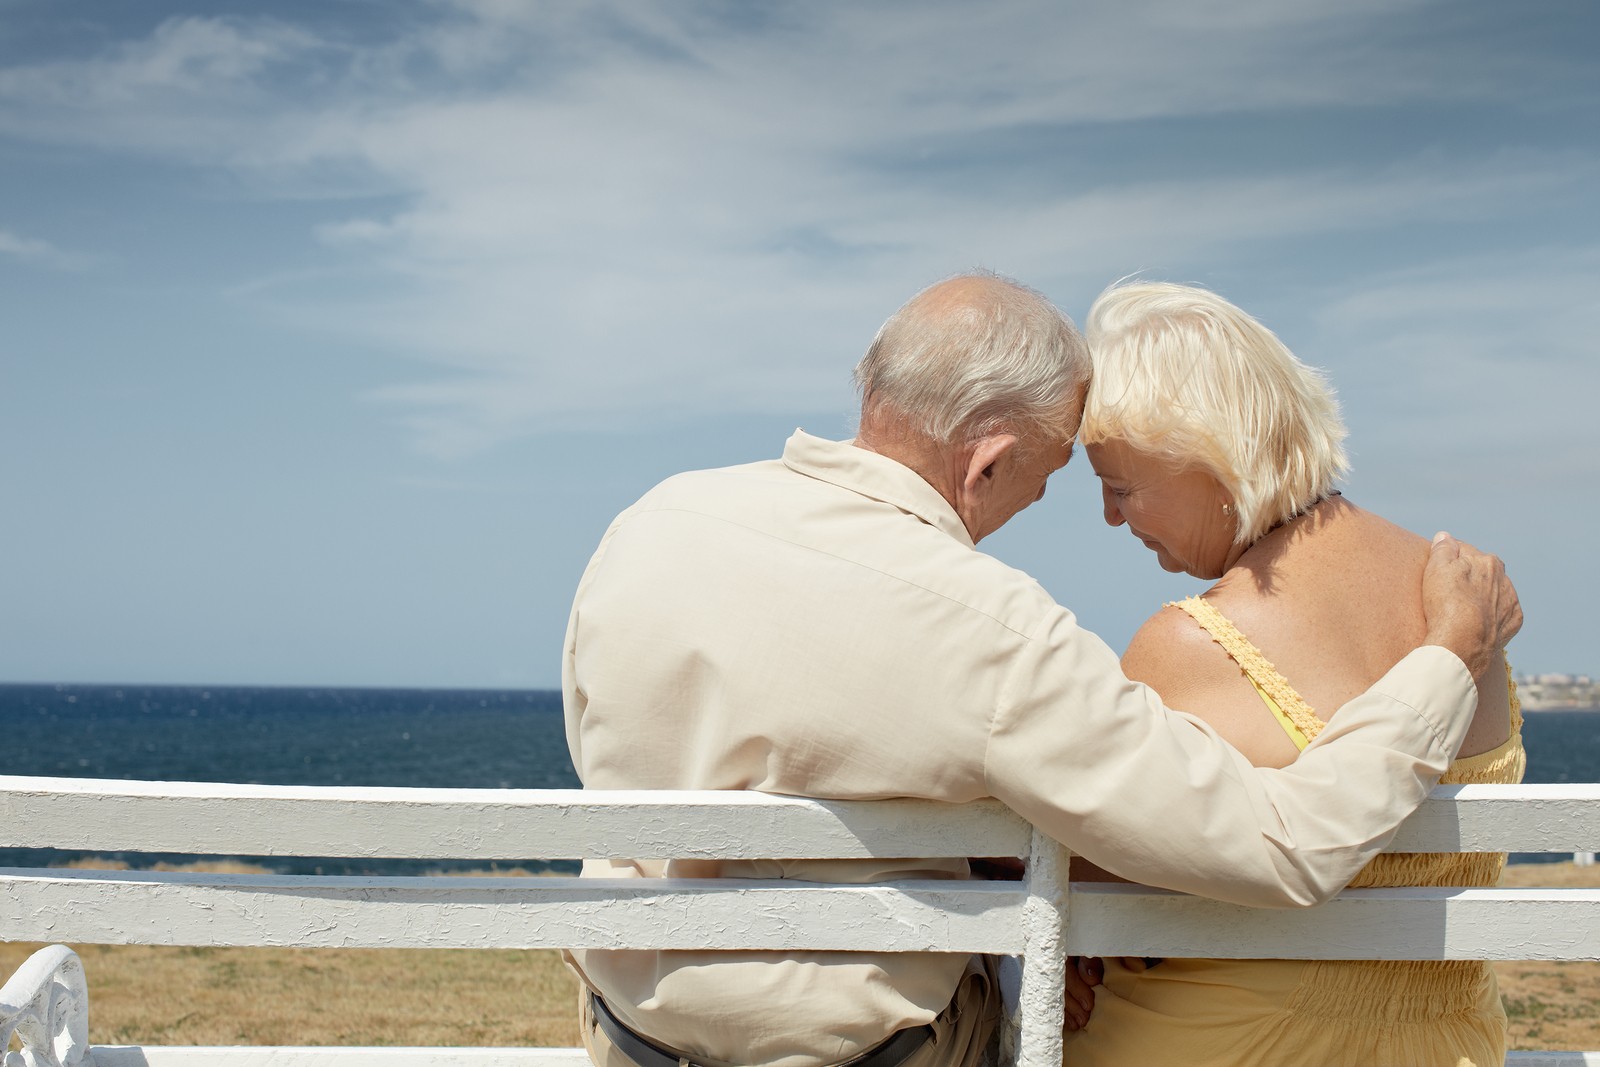 bigstock-Old-Man-And-Woman-On-Bench-At-20119661